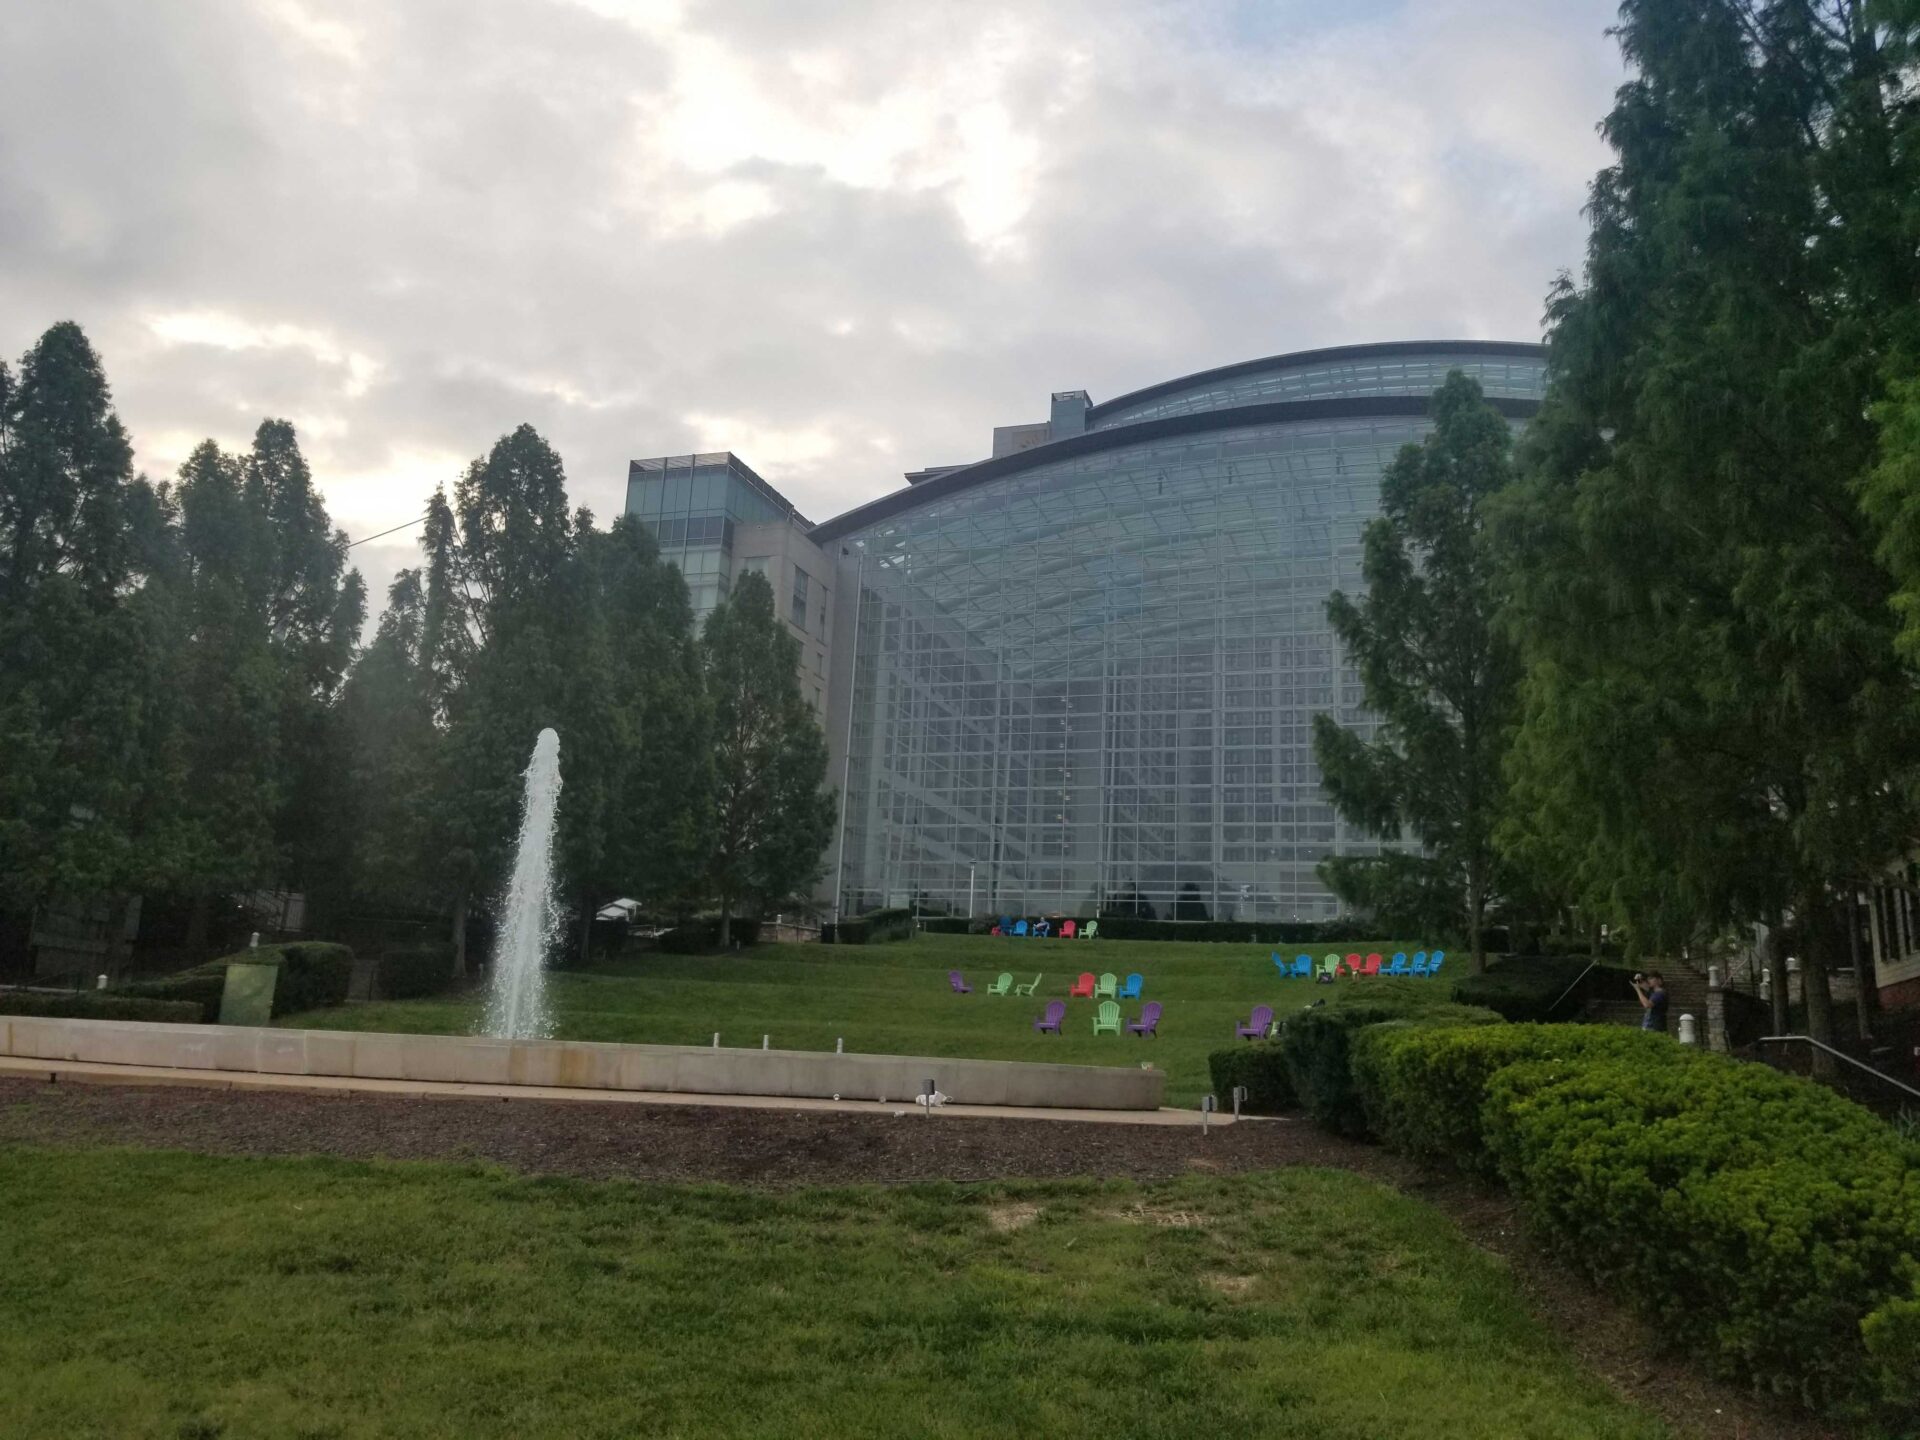 exterior view of Gaylord National Harbor on cloudy day